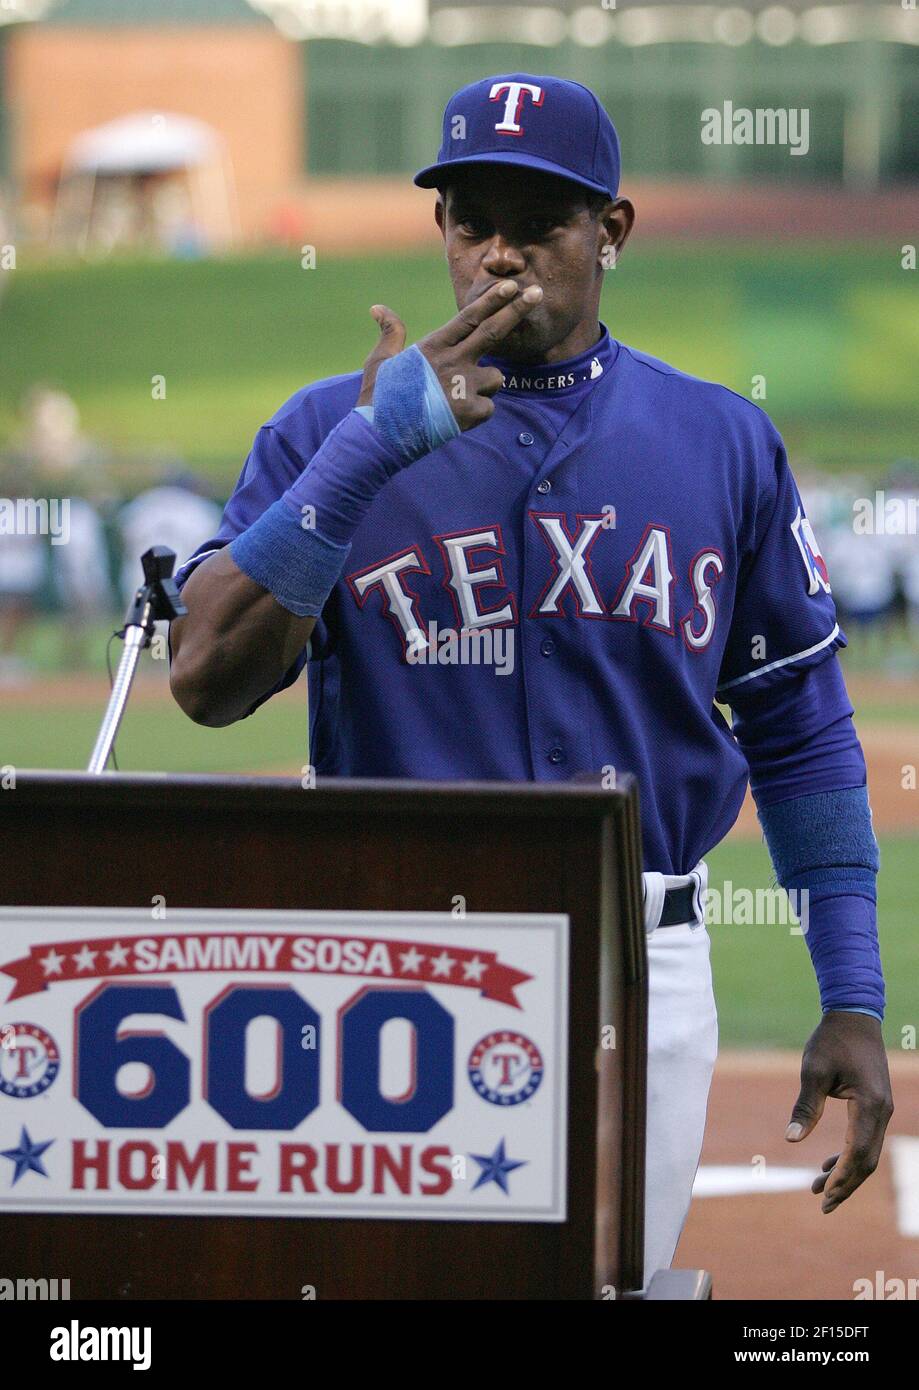 The Texas Rangers' Sammy Sosa gestures during a ceremony to honor him in  for his 600th home run prior to the game against the Cleveland Indians at  Rangers Ballpark in Arlington, Texas